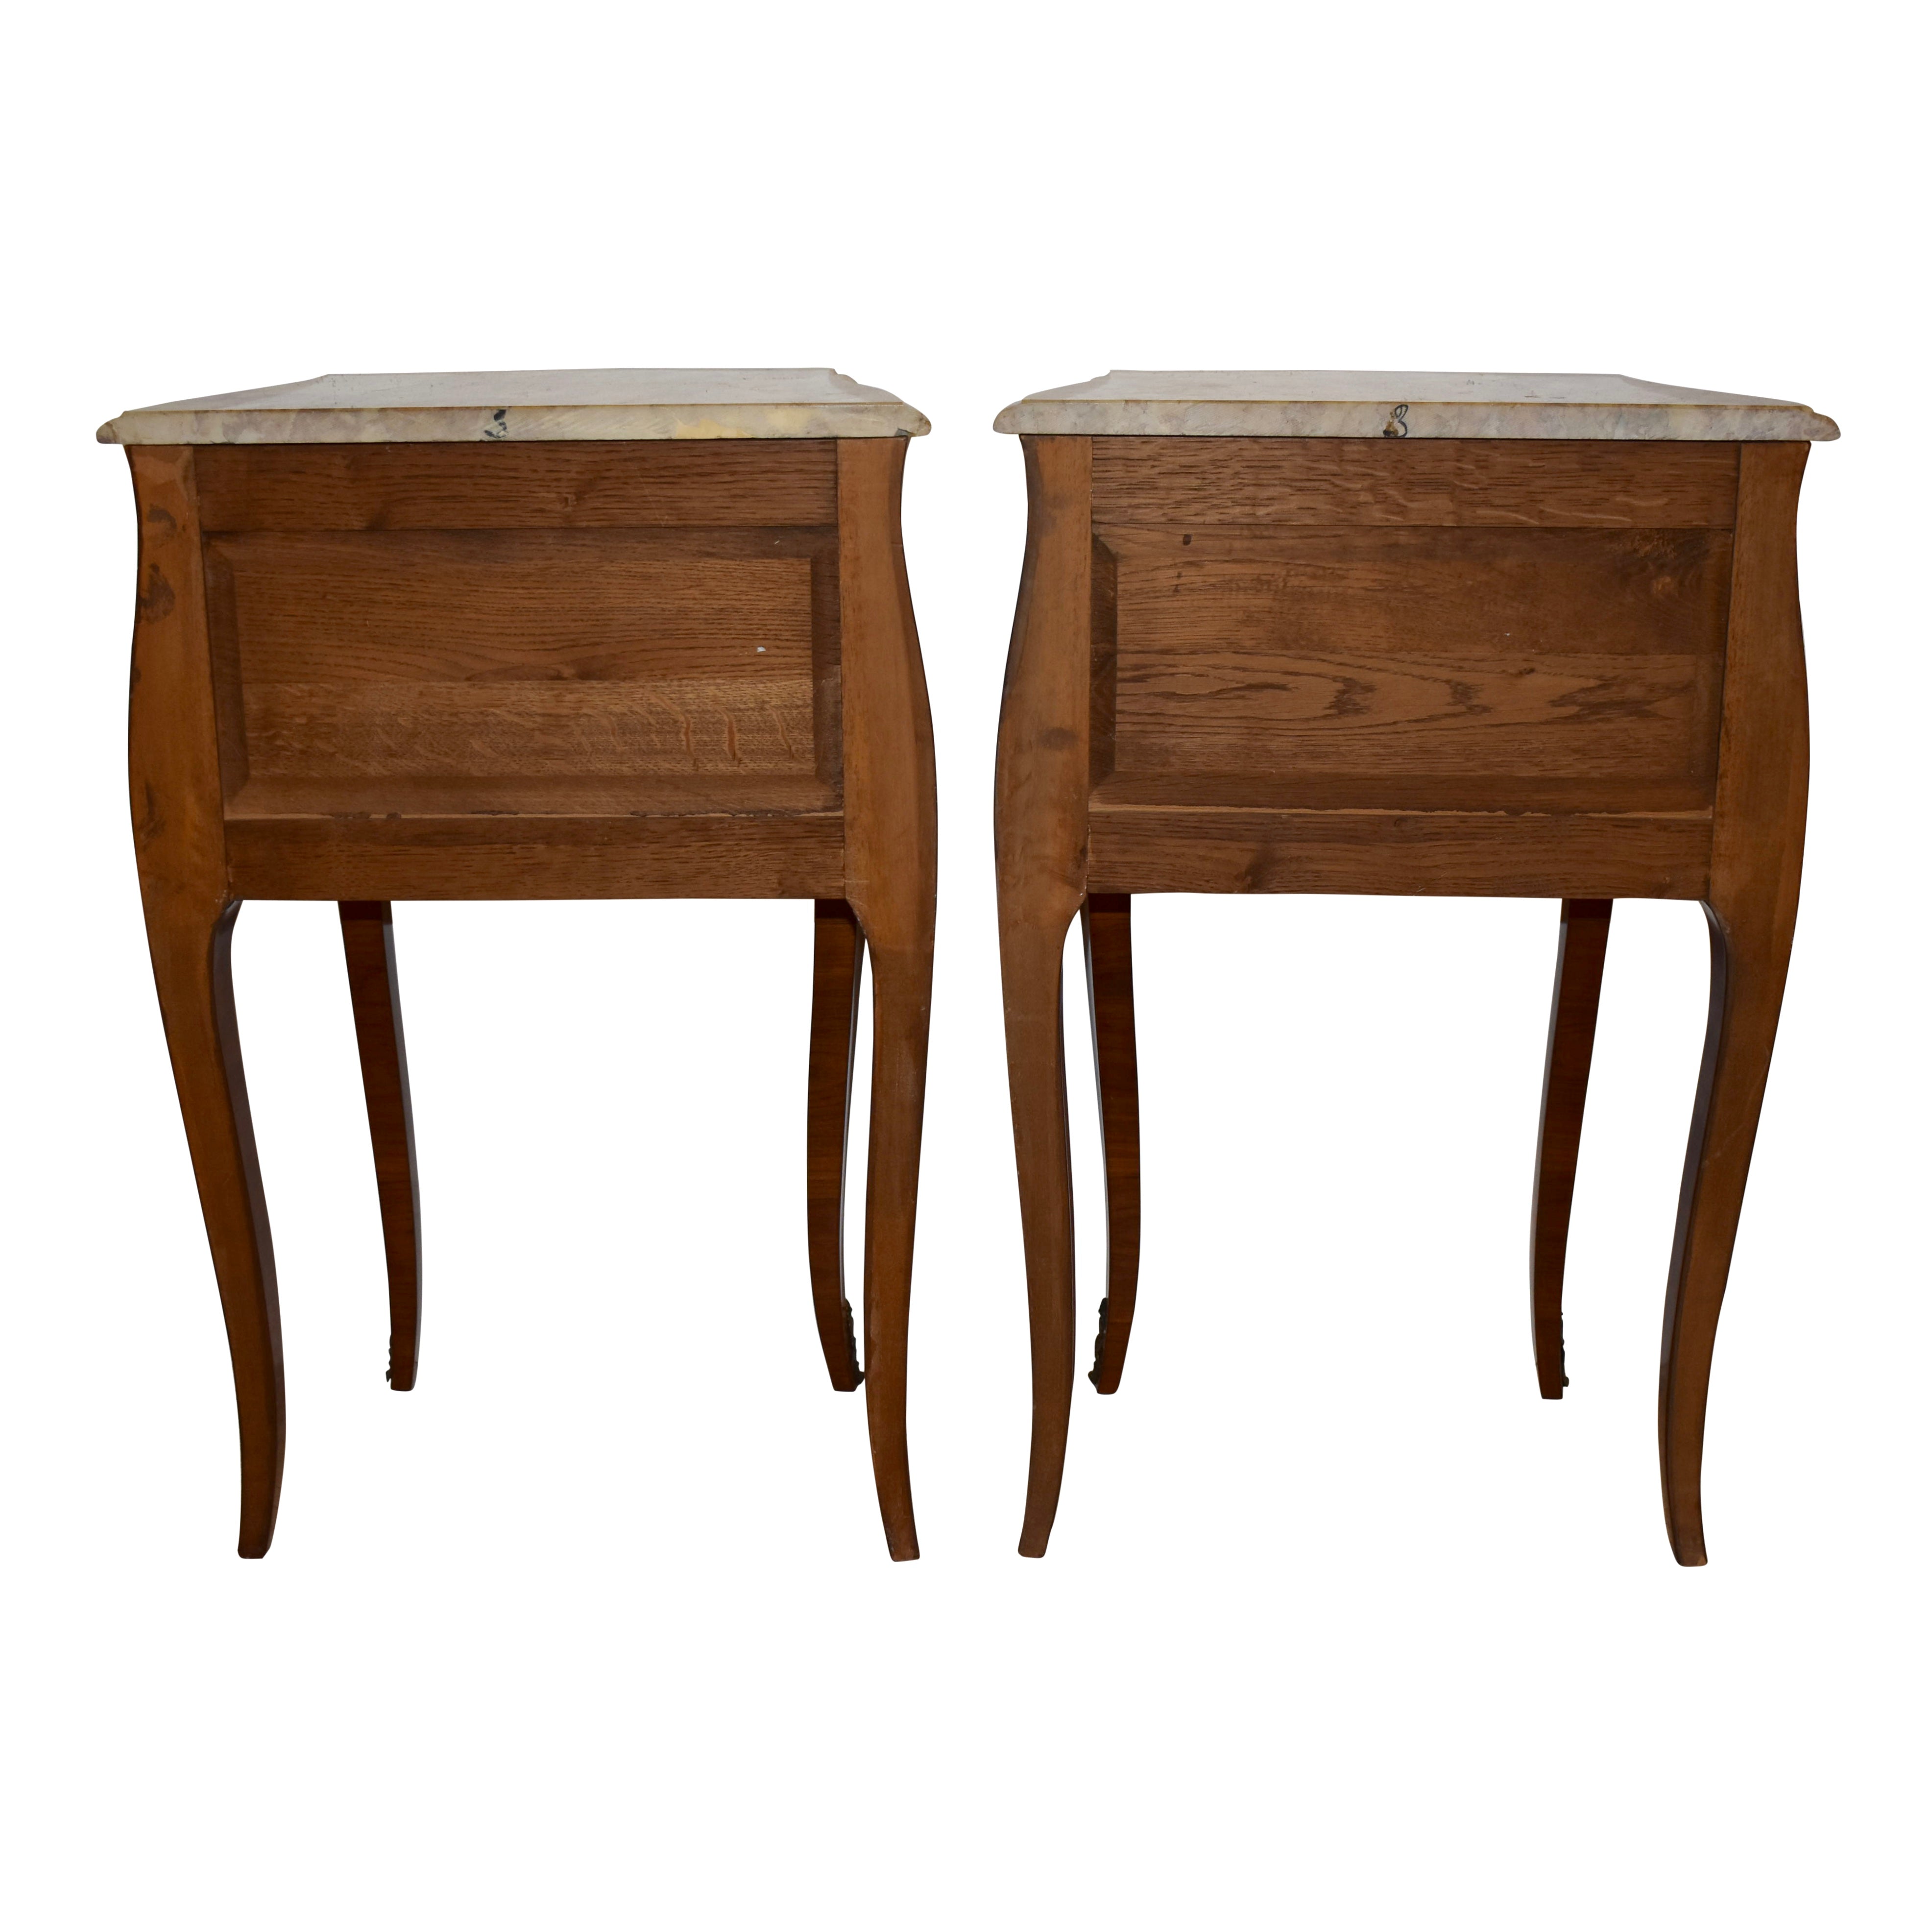 Louis XV Mahogany Nightstands with Marble Tops, Set of Two